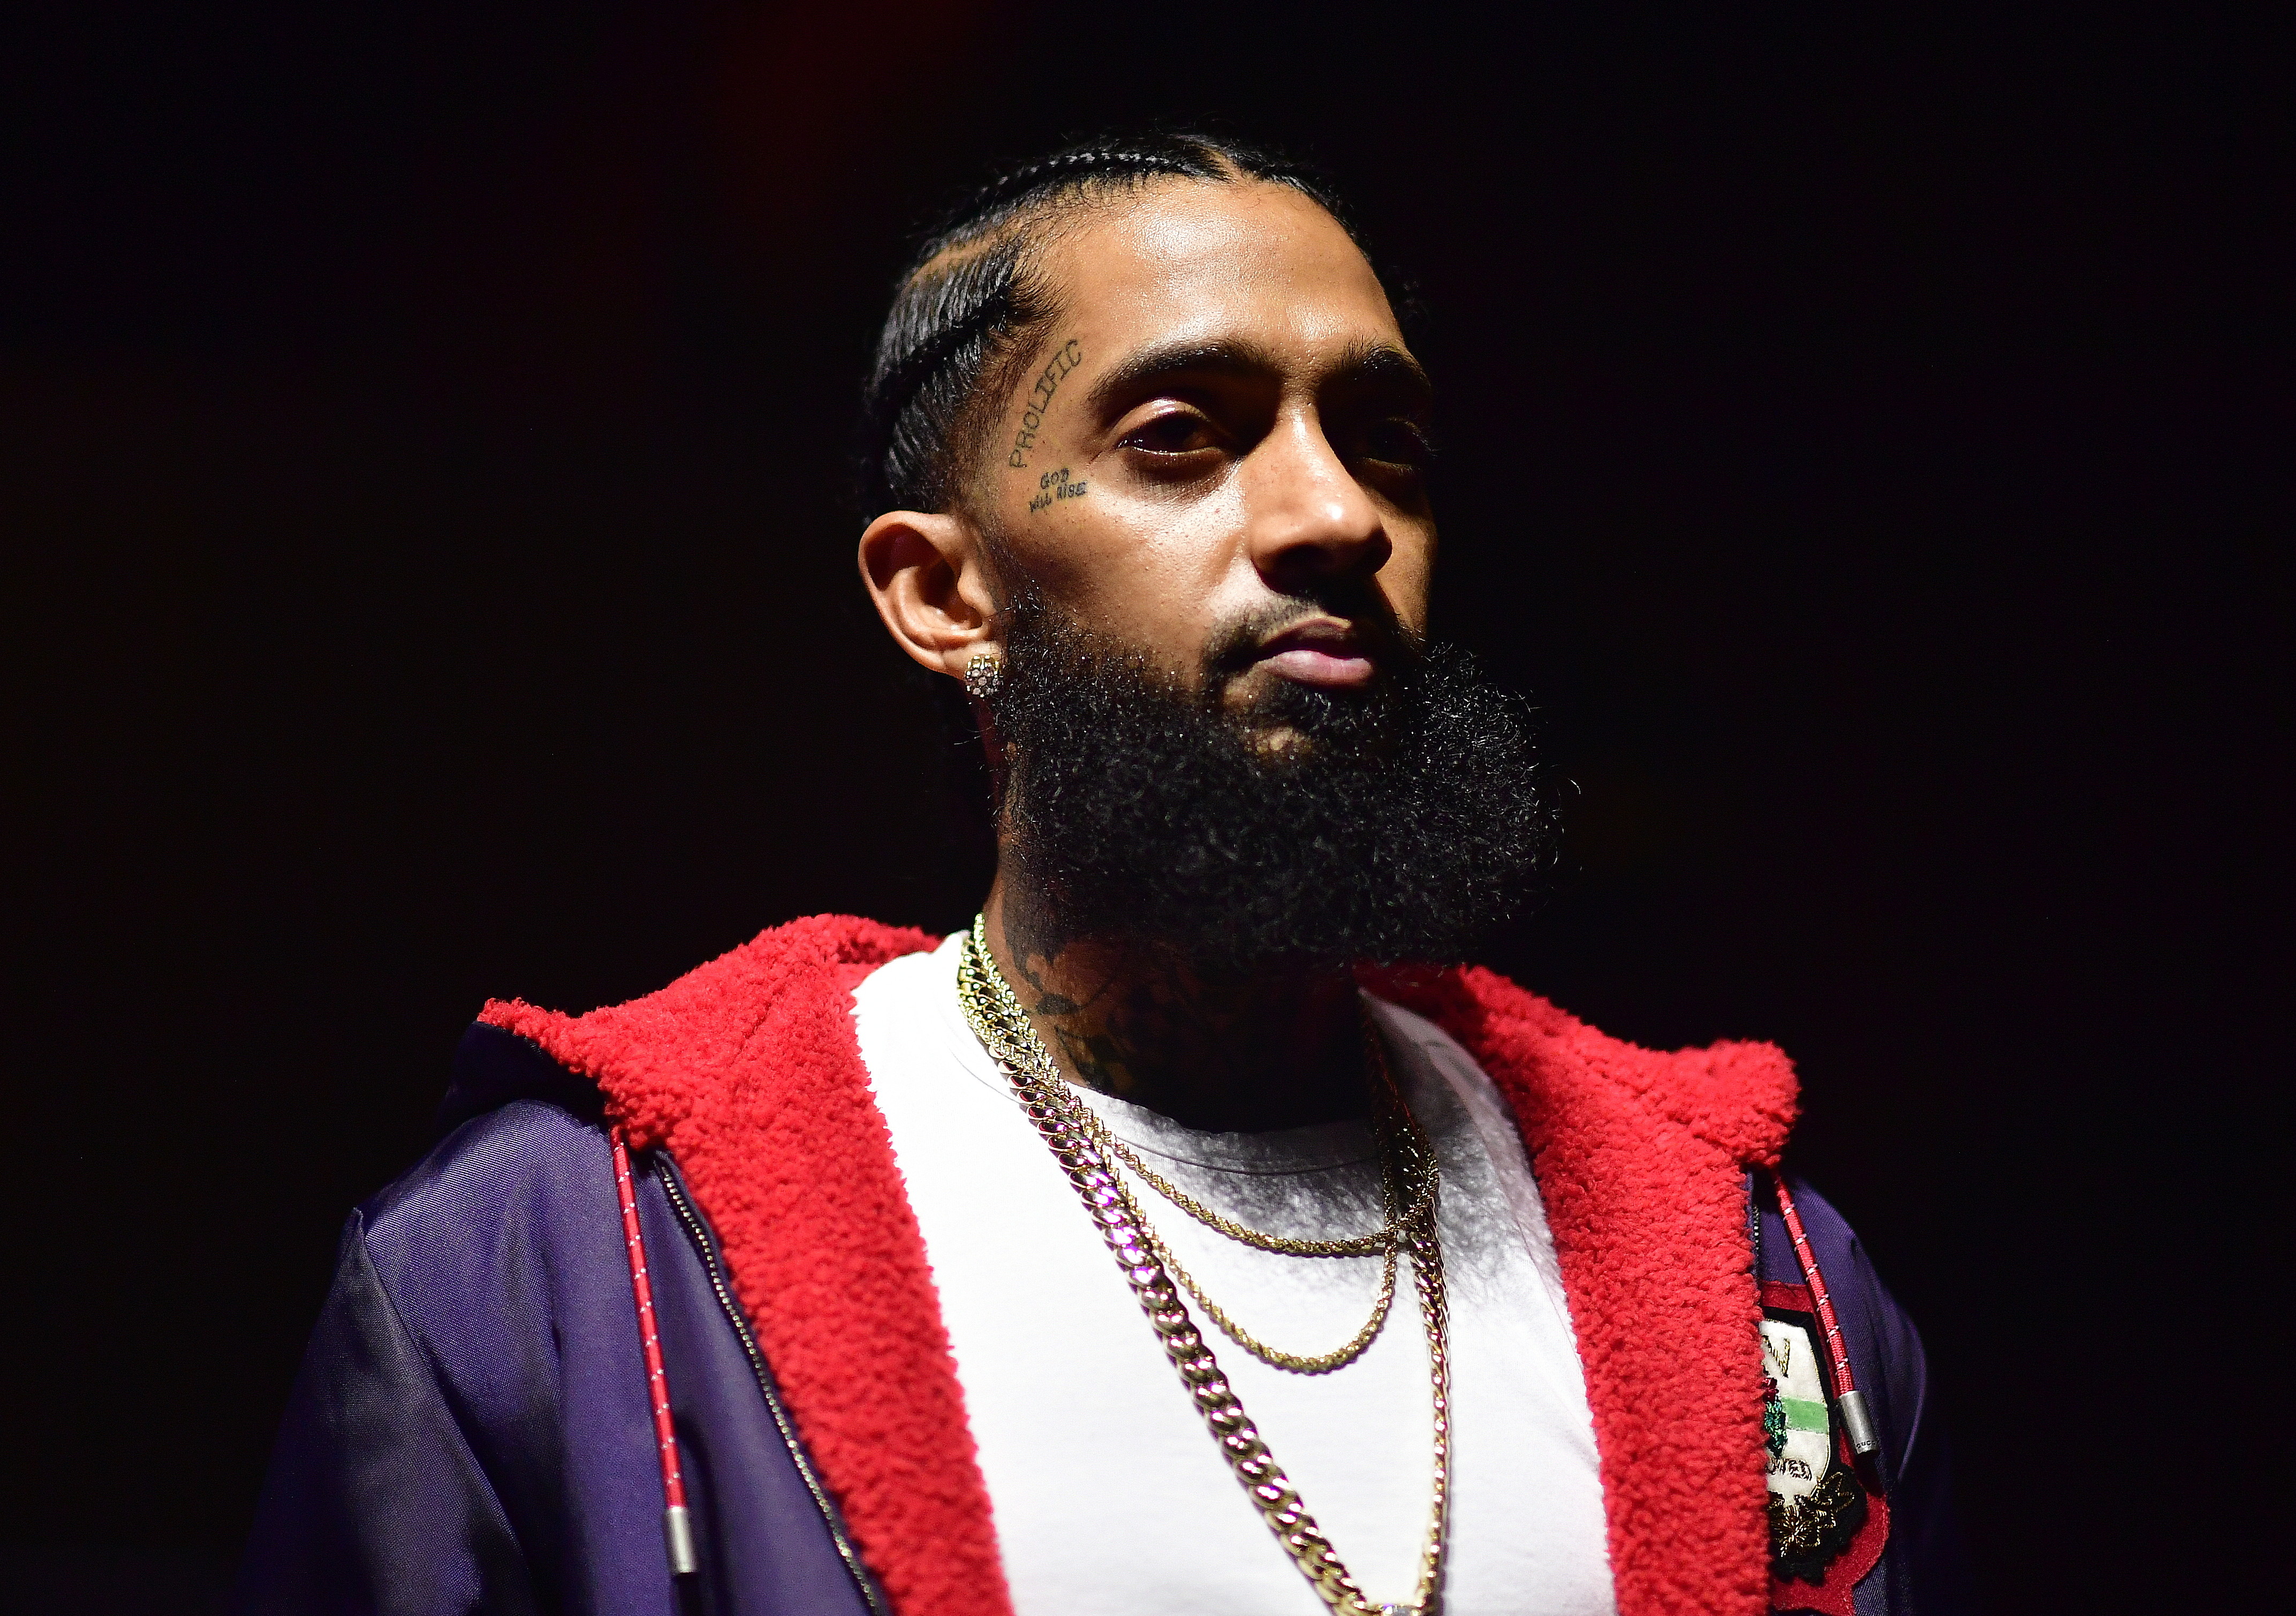 Nipsey Hussle f/ Roddy Ricch and Hit Boy, “Racks in the Middle”